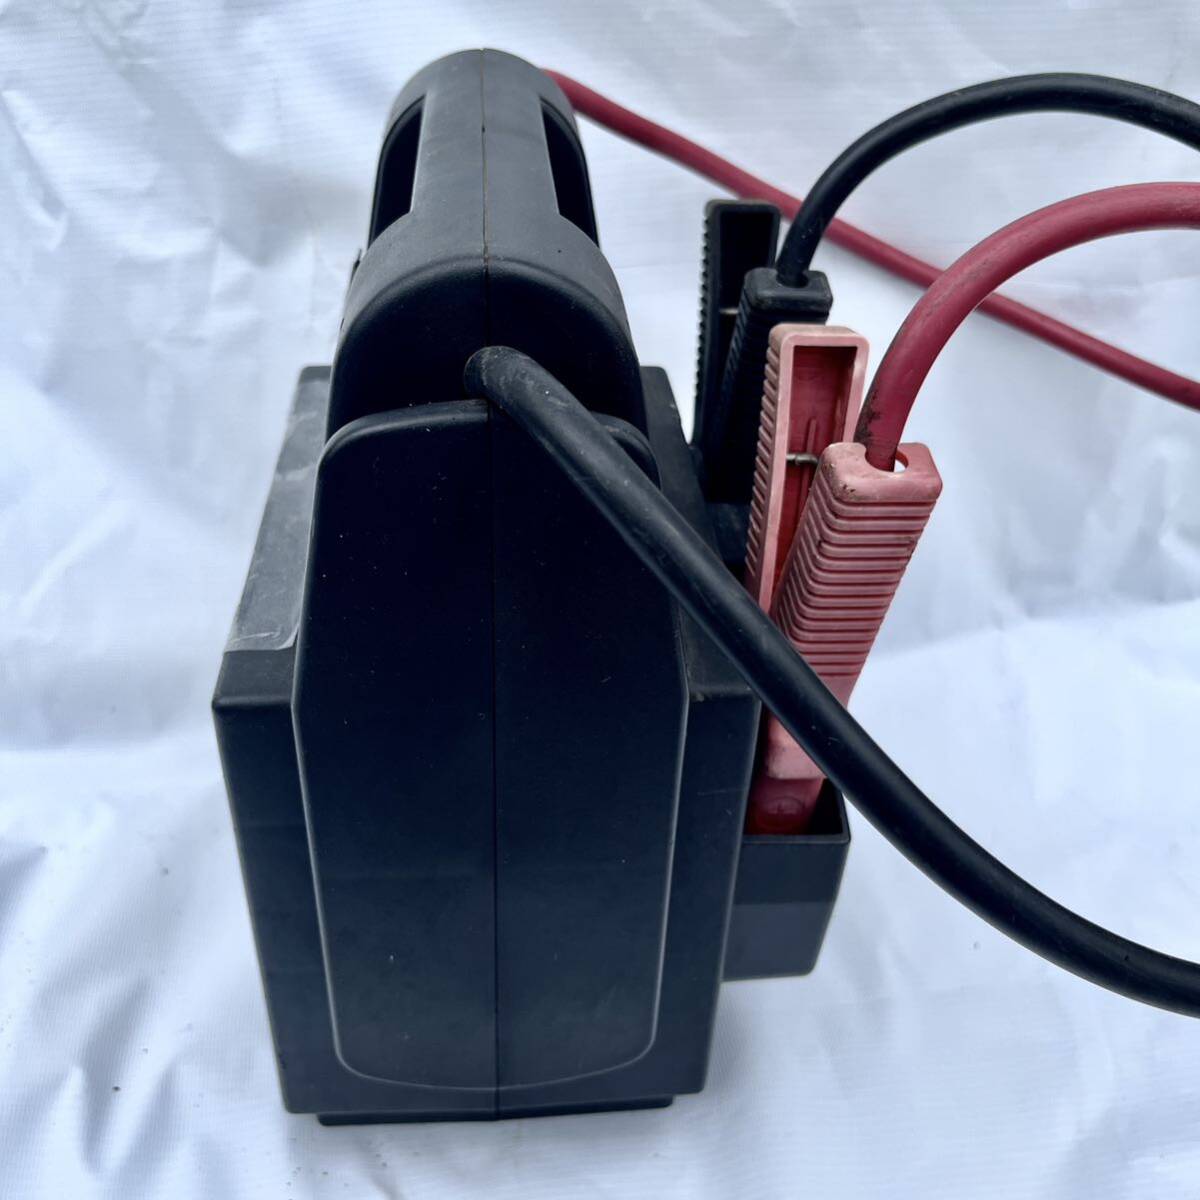 [ junk treatment ] Daiji Industry engine starter Jump starter records out of production goods 